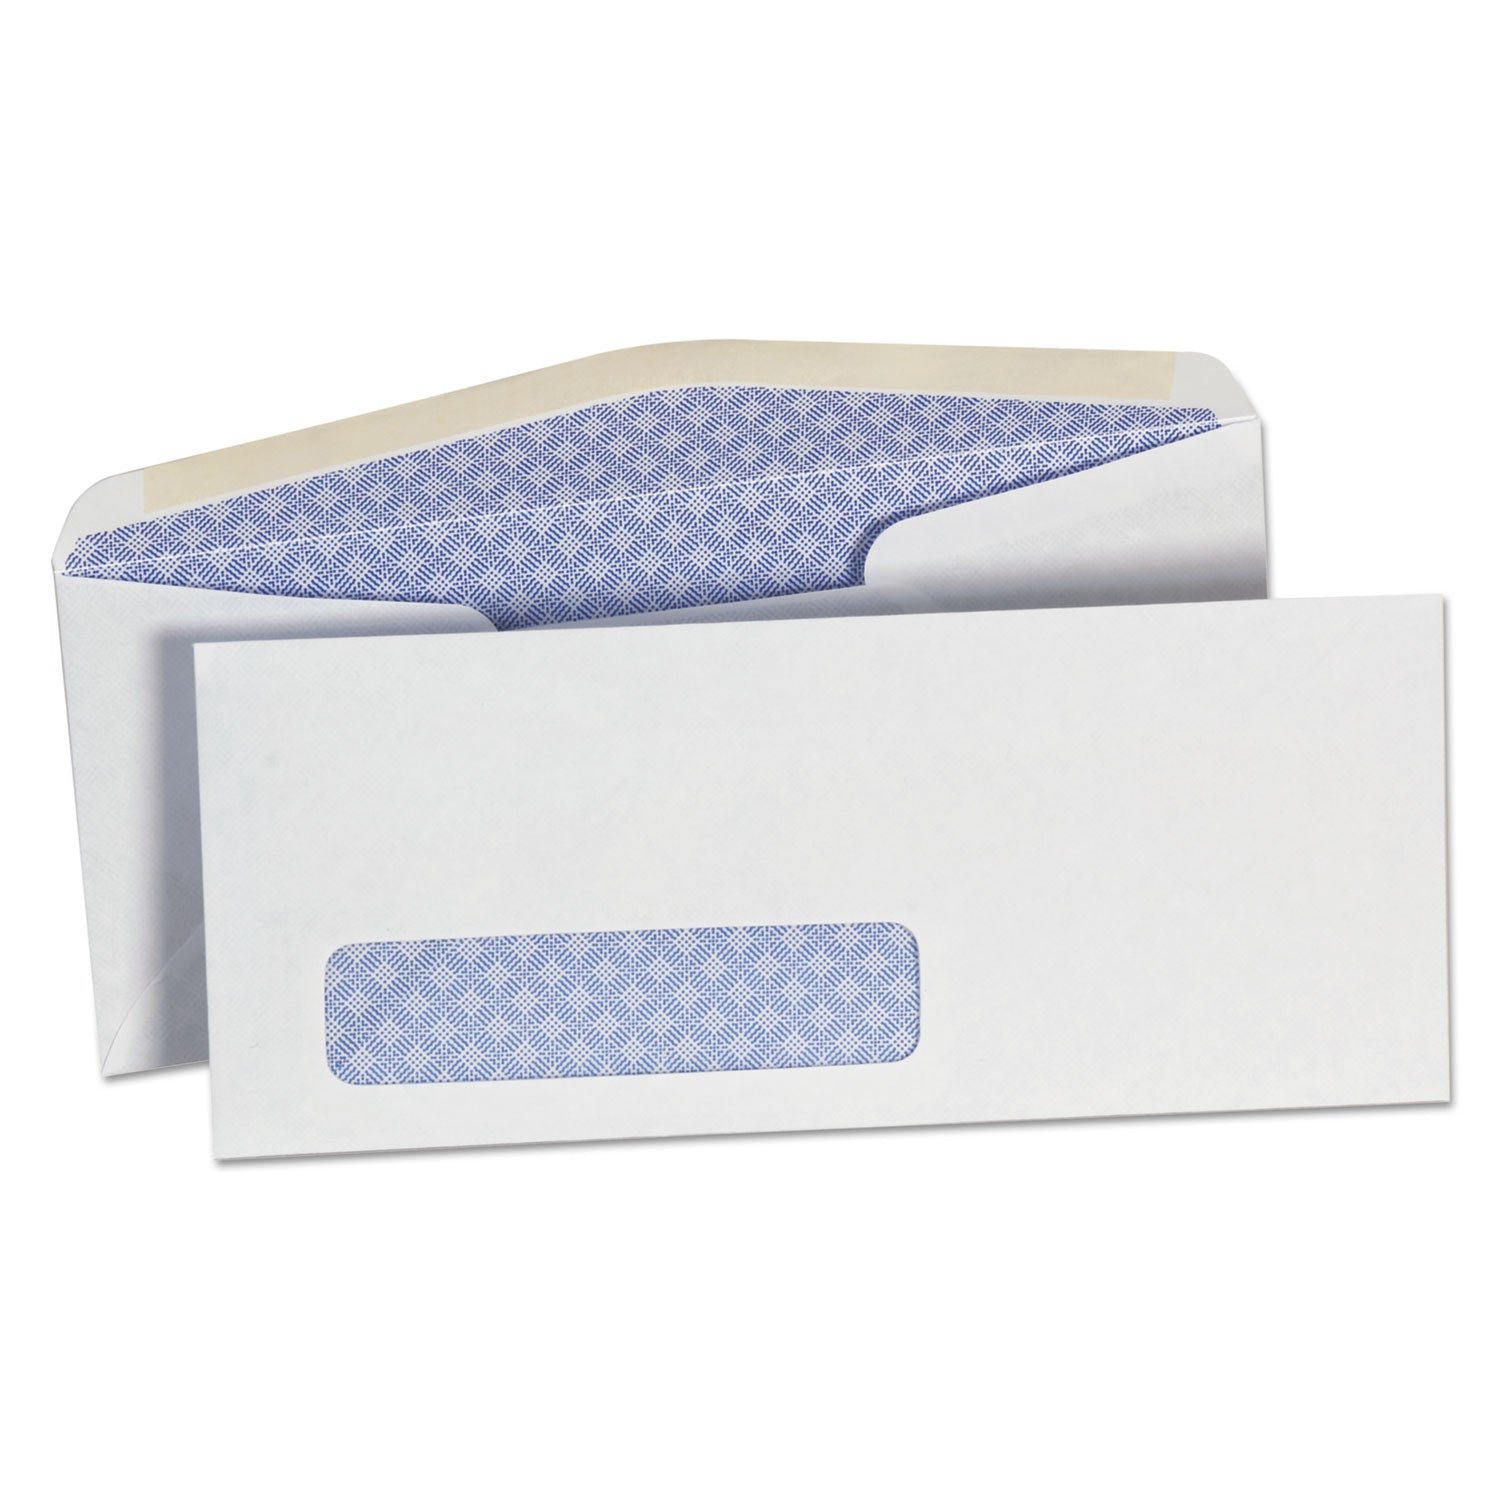 #10-trade-size-security-tint-envelope-commercial-flap-gummed-closure-413-x-95-white-500-box_off82291 - 1